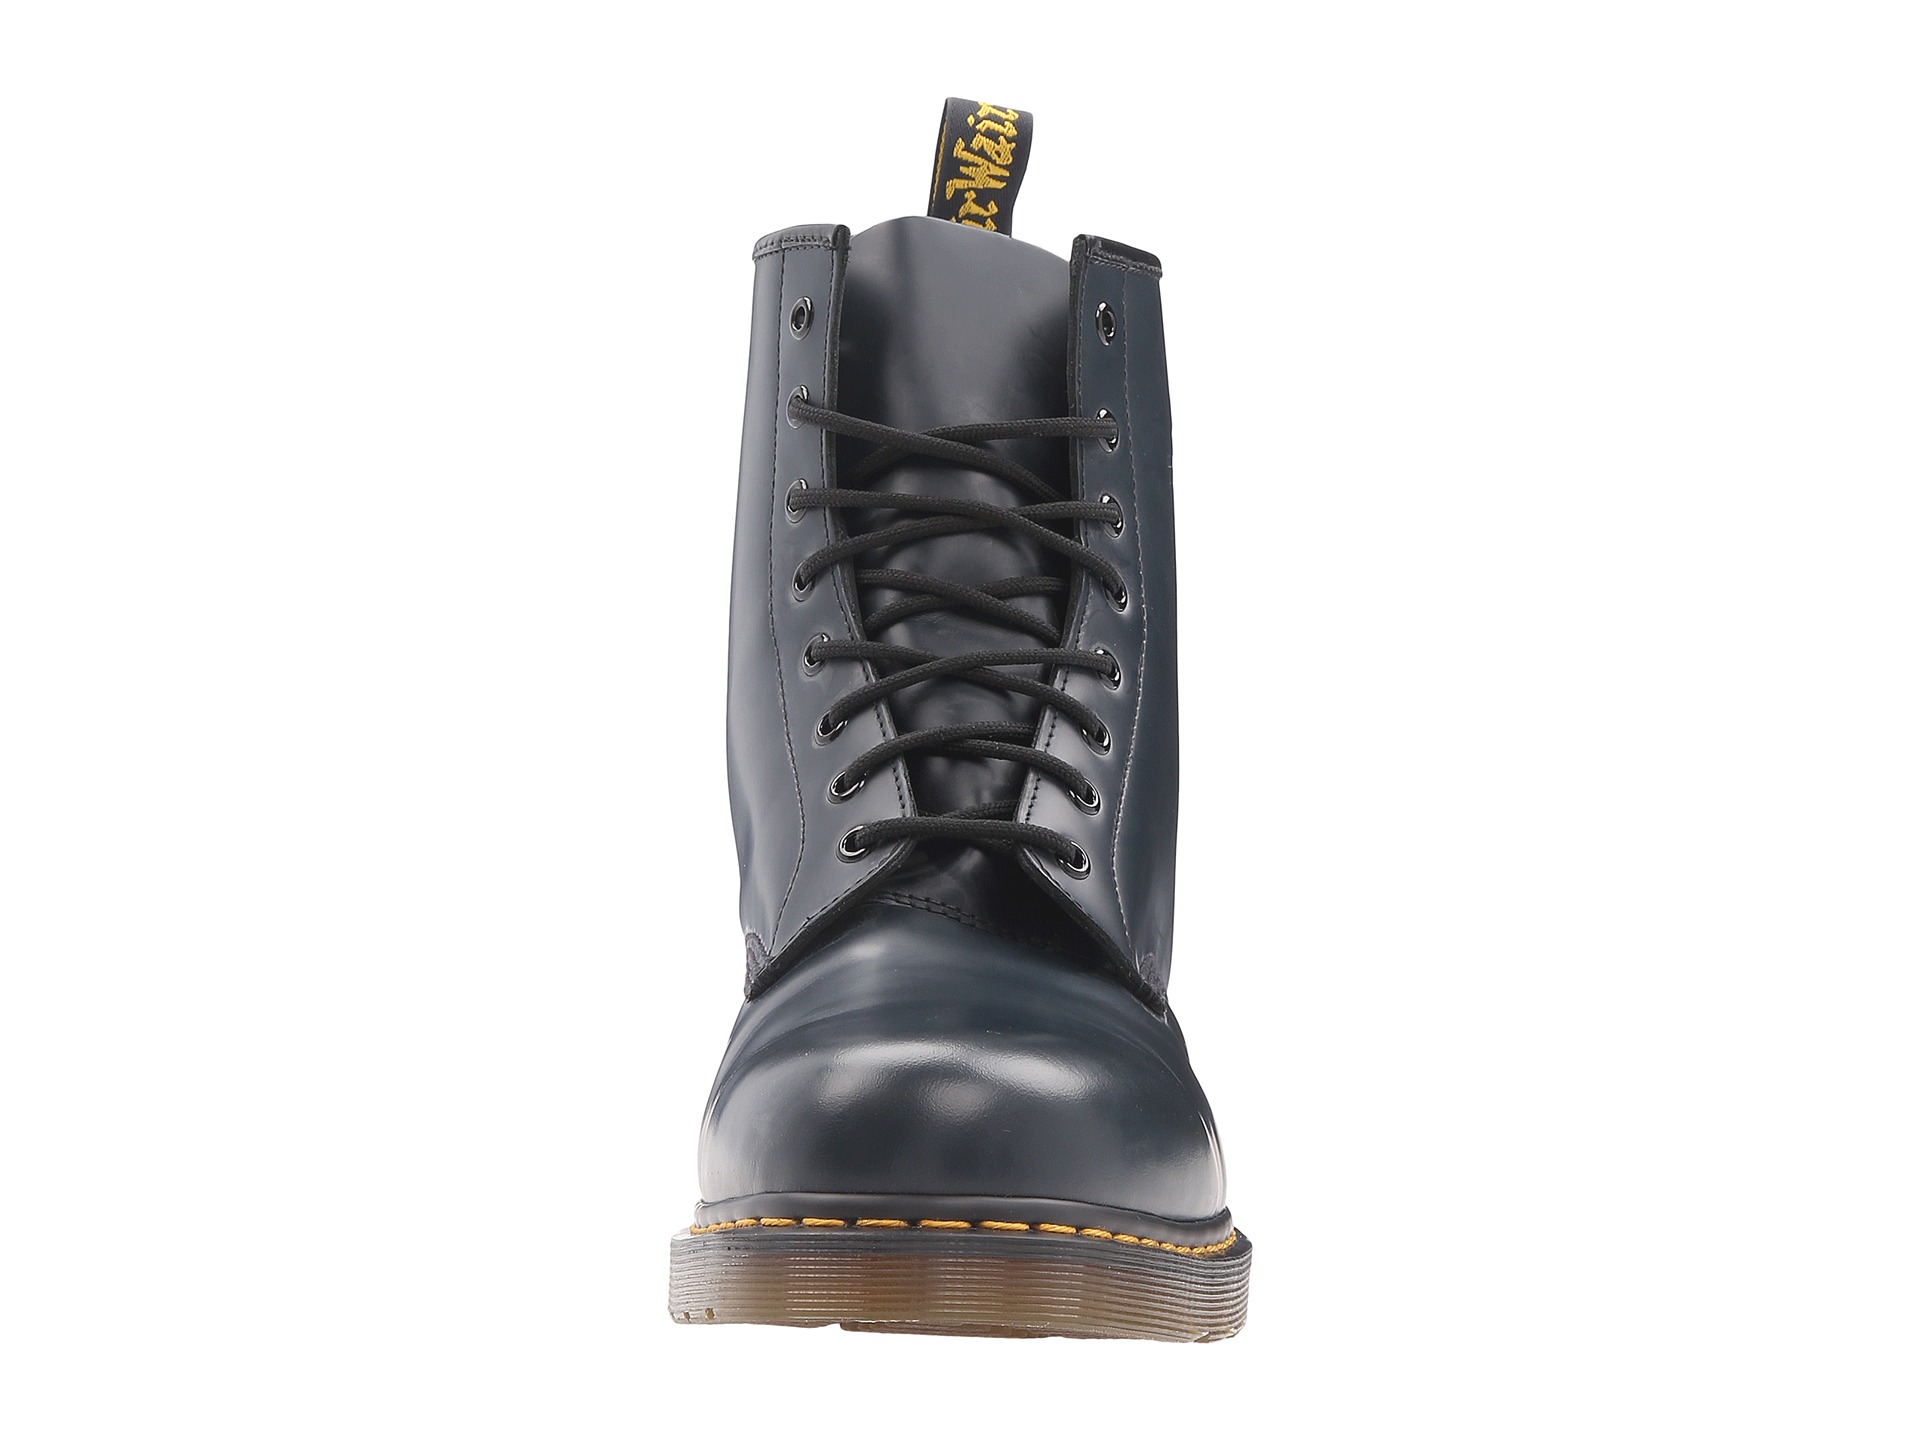 Dr. Martens 1460 Navy Smooth - Zappos.com Free Shipping BOTH Ways